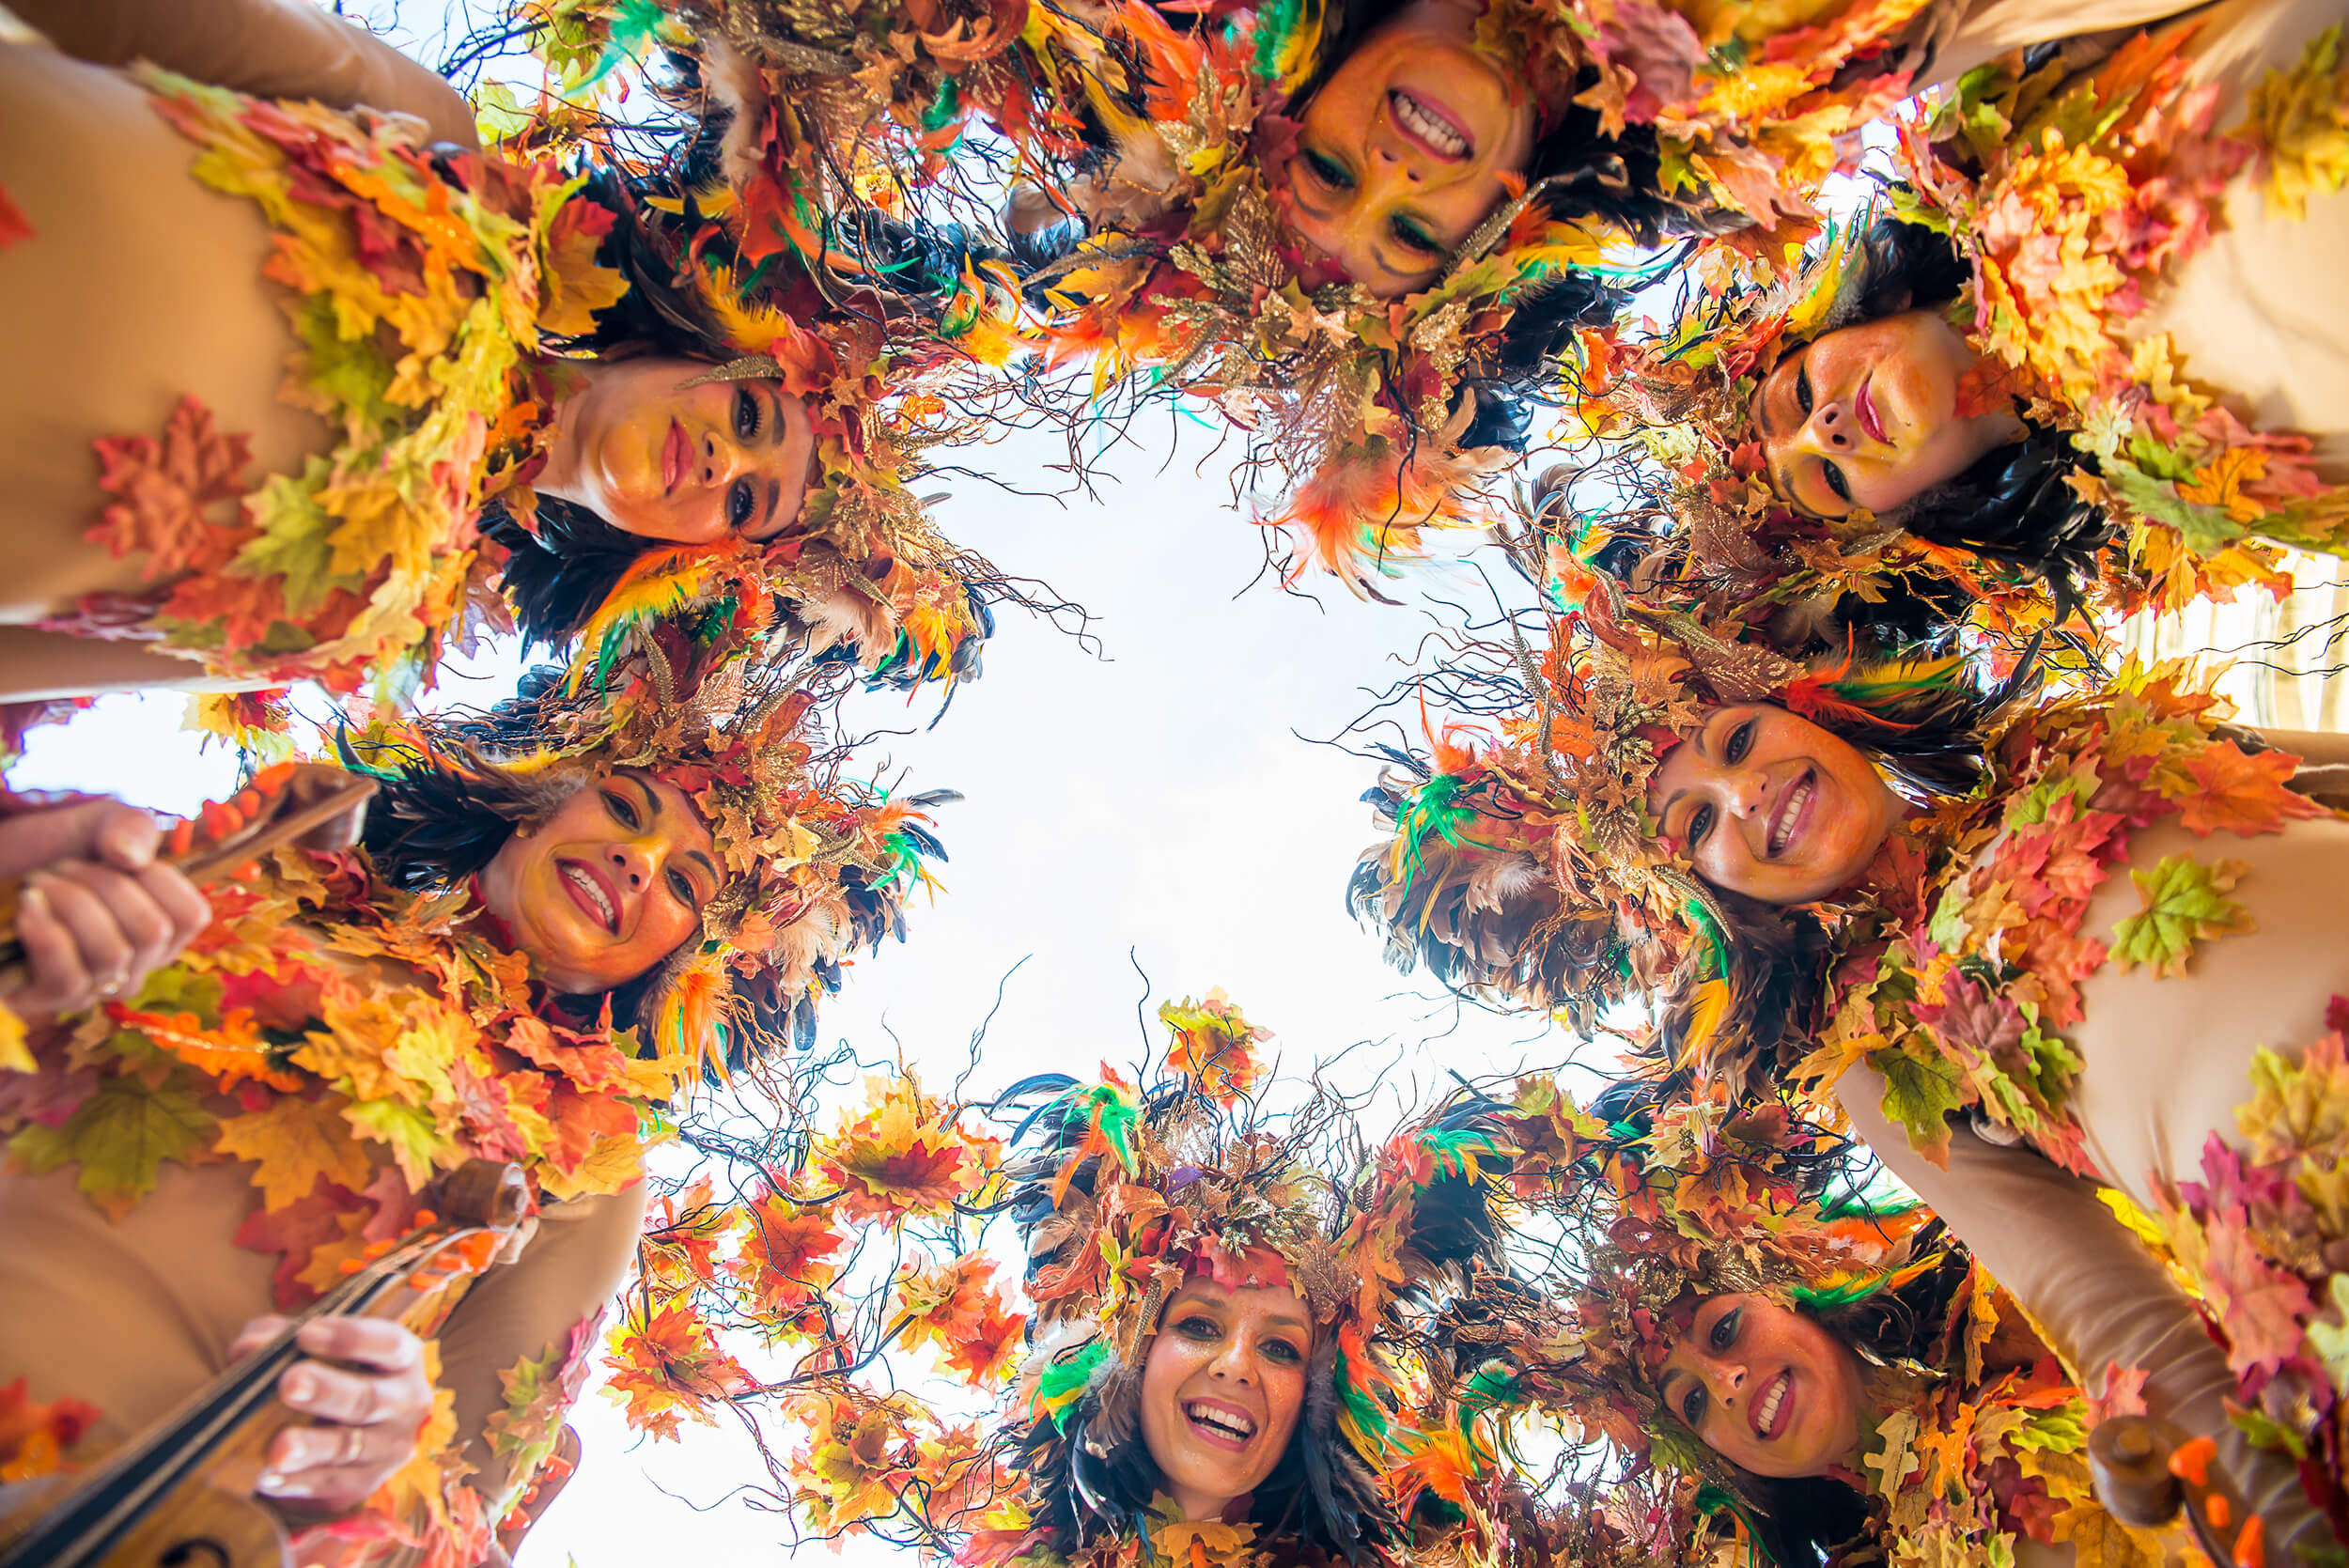 Carnival in Gozo is a must-experience